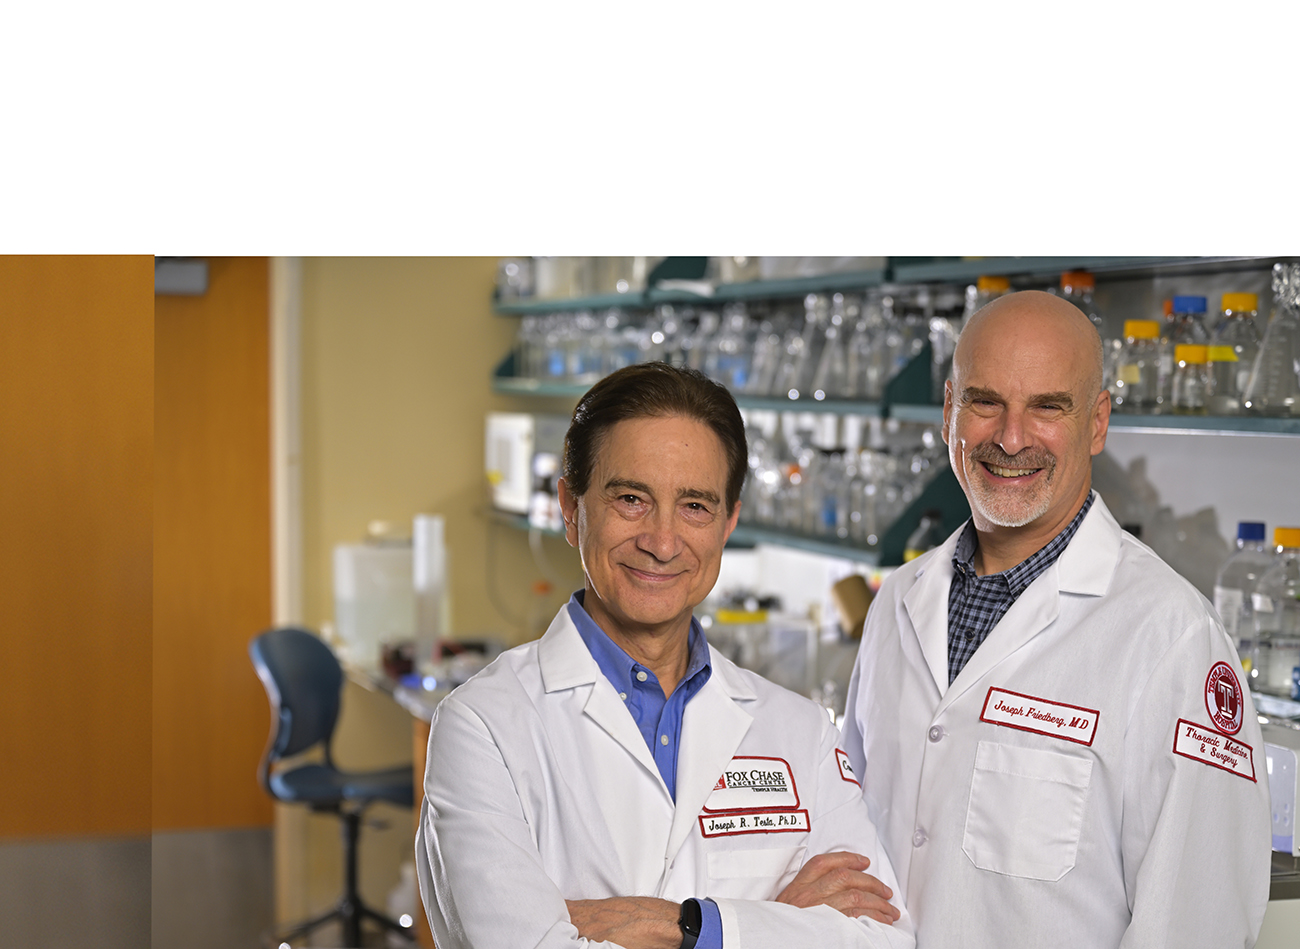 Dr. Testa and Dr. Friedberg standing in a laboratory and smiling.